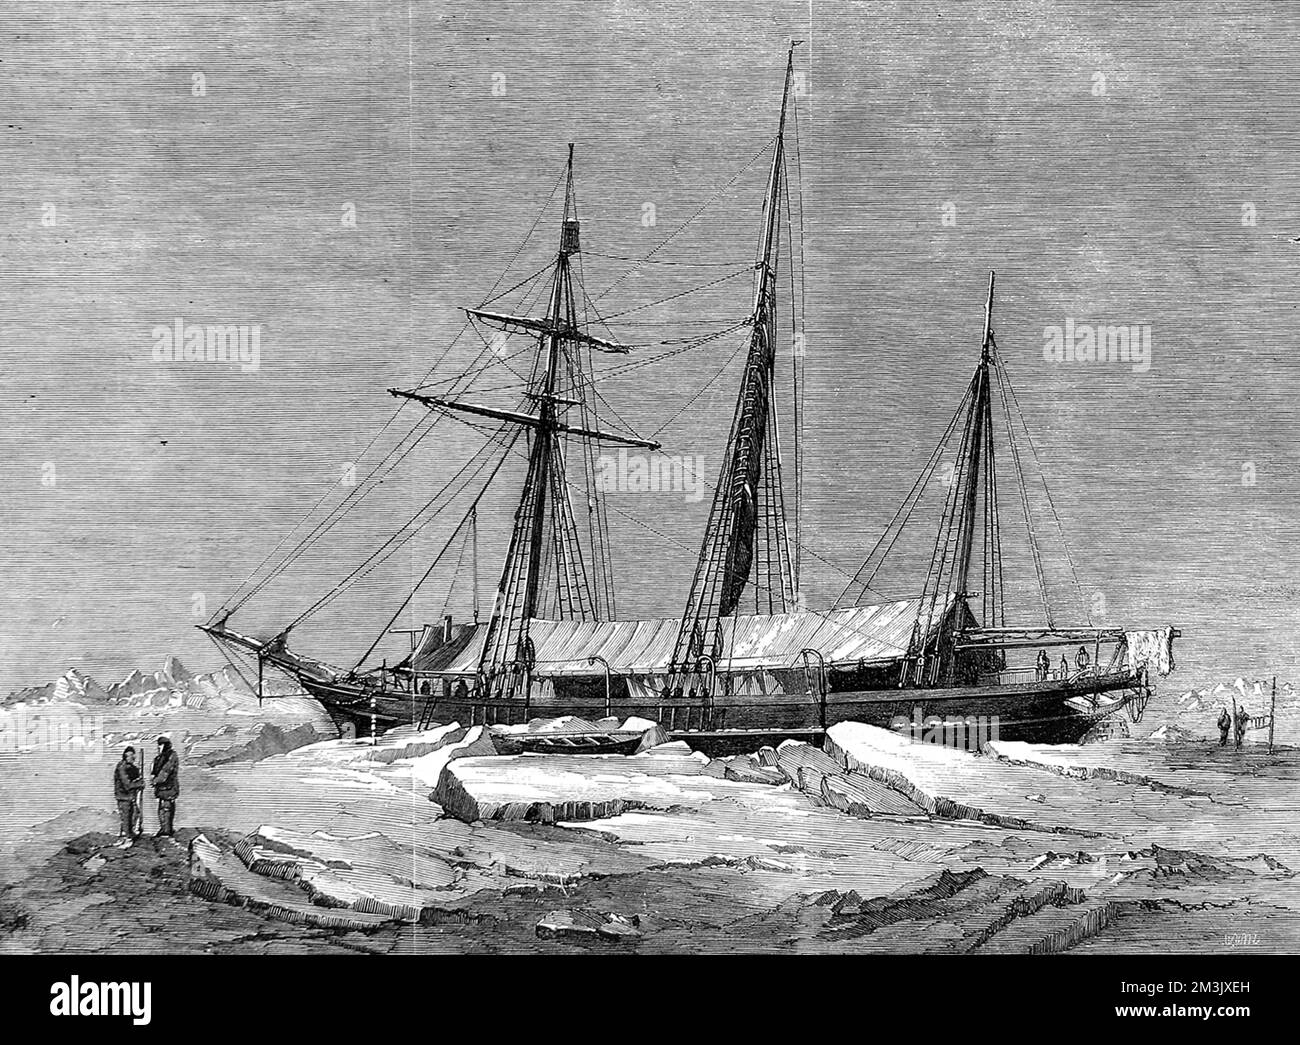 The yacht 'Fox' wintering in the ice pack, 1859. The 'Fox', commanded by Captain F.L. McClintock, went to the Arctic region in search of Sir John Franklin's ill-fated Arctic expedition of 1845.   In 1845 the British Admiralty sent two polar exploration ships, HMS 'Erebus' and HMS 'Terror', to look for the Northwest passage round the northern coast of Canada. The expedition, commanded by Sir John Franklin, disappeared from view late in 1845 and none of the men were ever seen again.   In fact the ships made it to the King William Island region, then got stuck in the ice. With supplies r Stock Photo